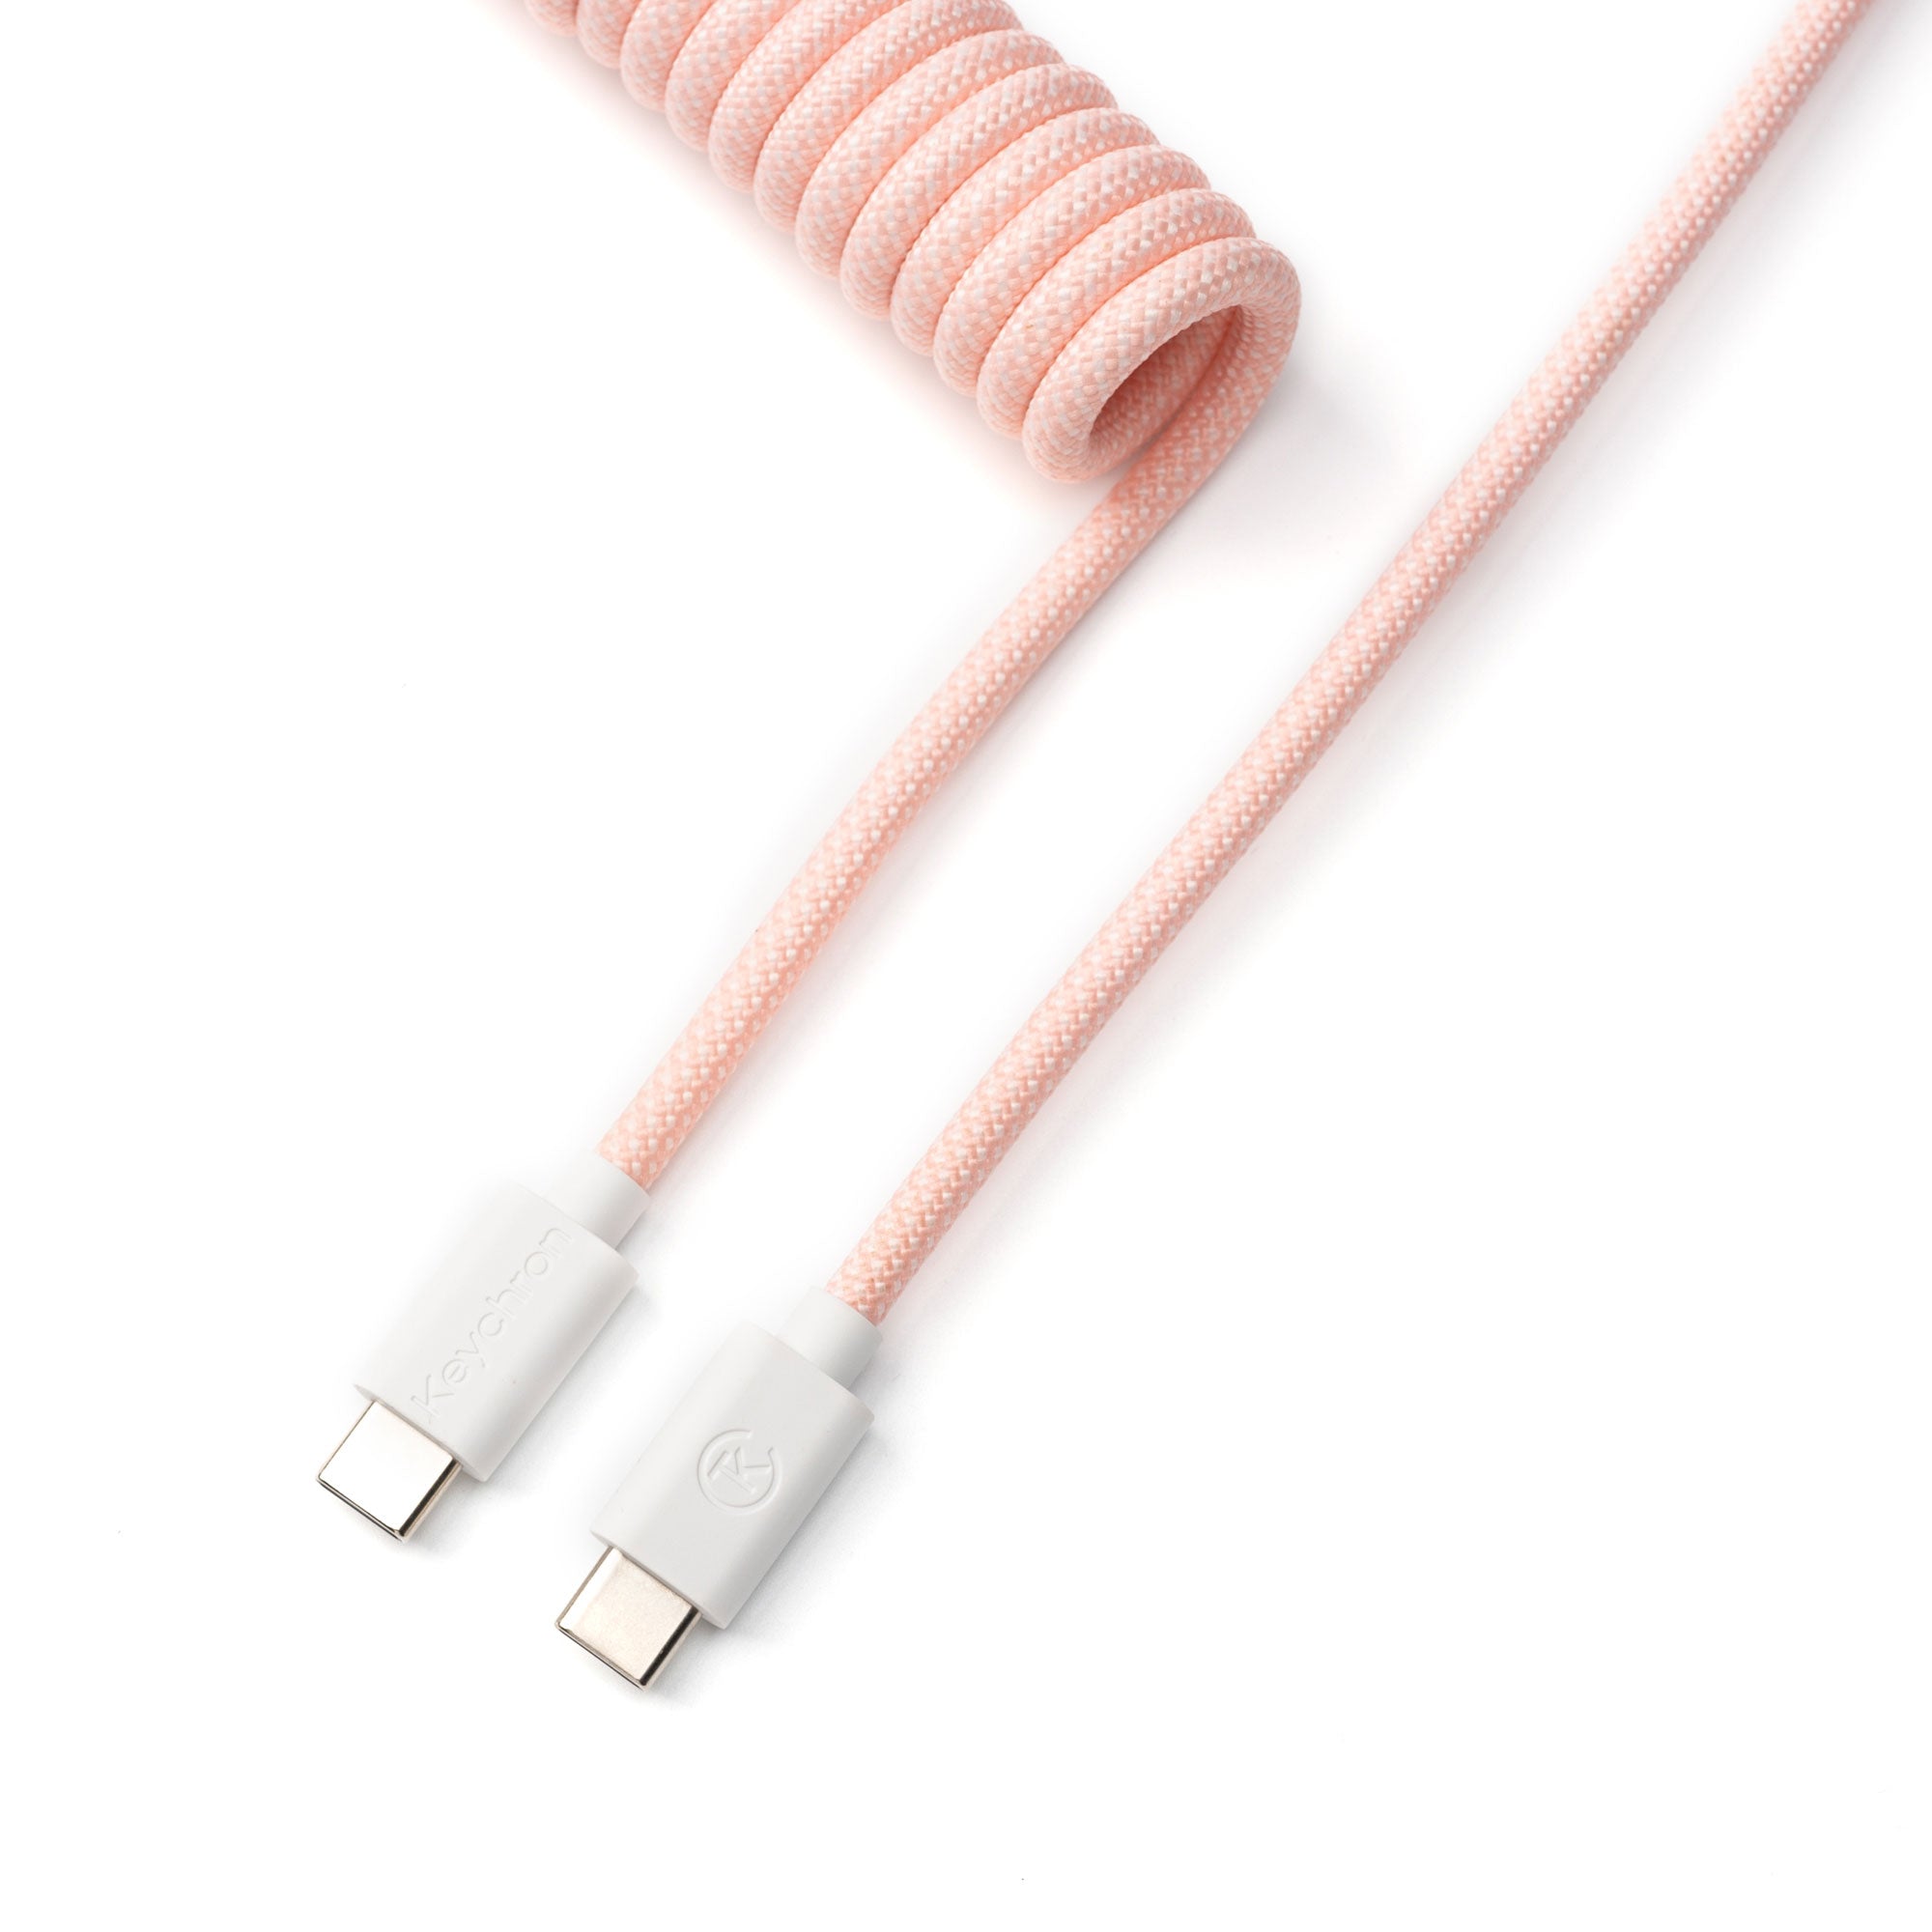 Keychron custom coiled aviator USB type-C cable for keyboards light pink color